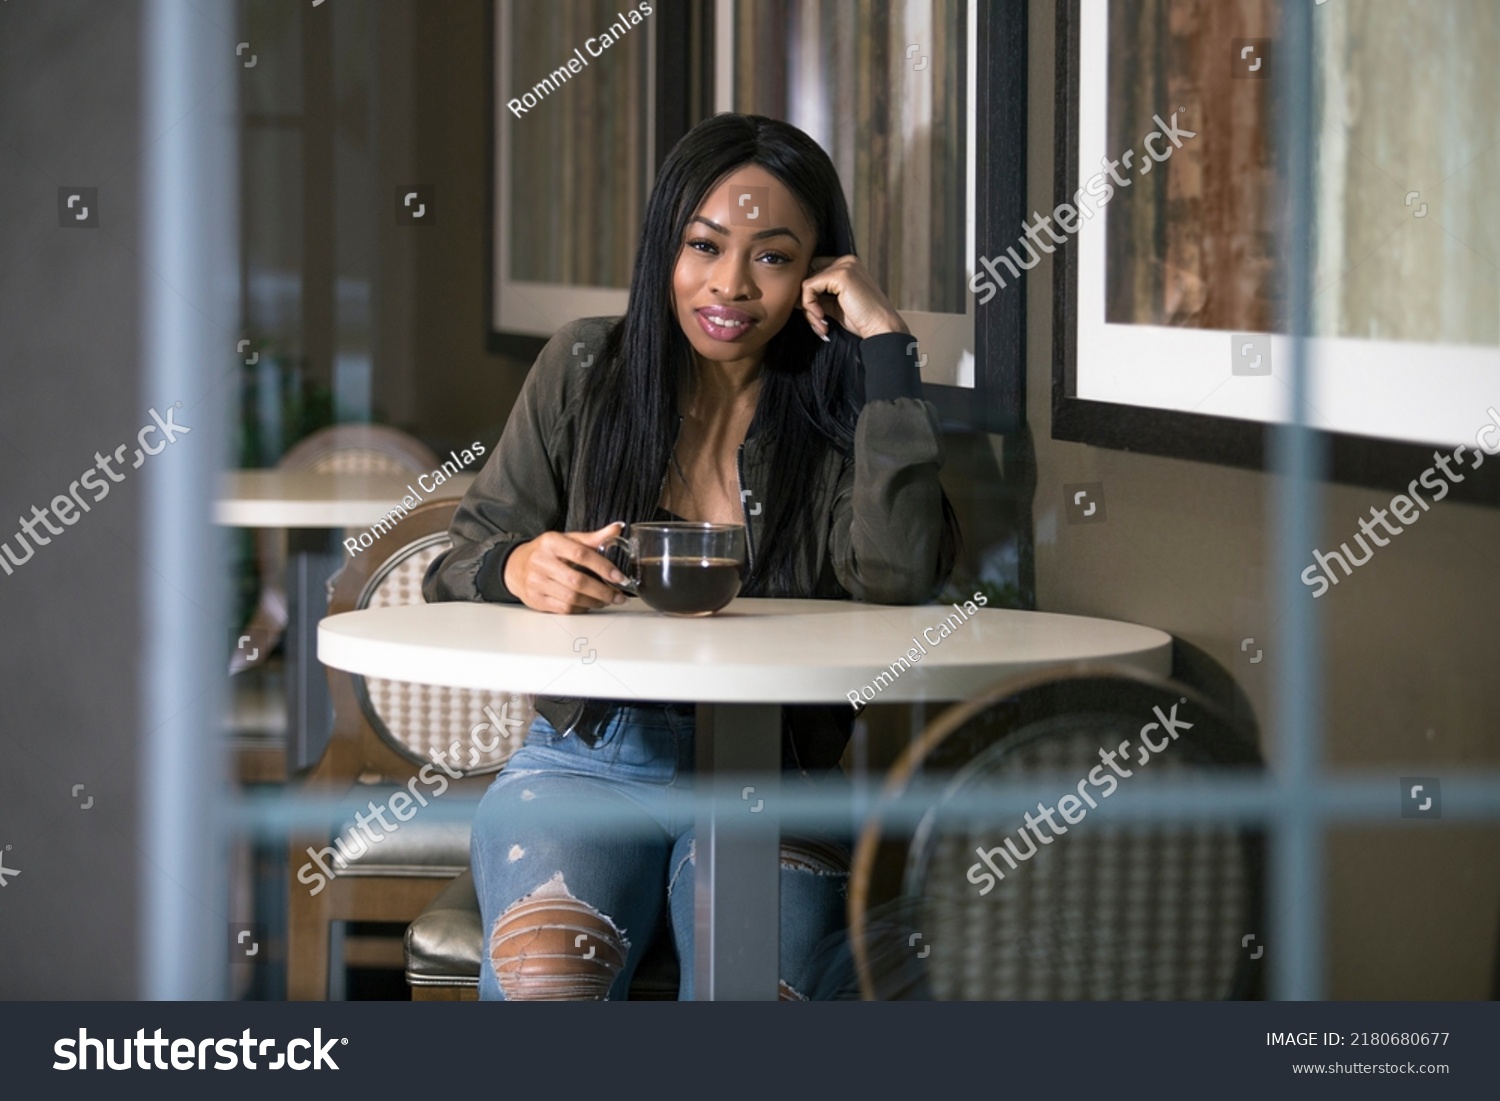 Window view of a black female having coffee in a coffeeshop or sidewalk cafe.  The entrepreneur businesswoman on a break or student is waiting patiently and looks independent. #2180680677